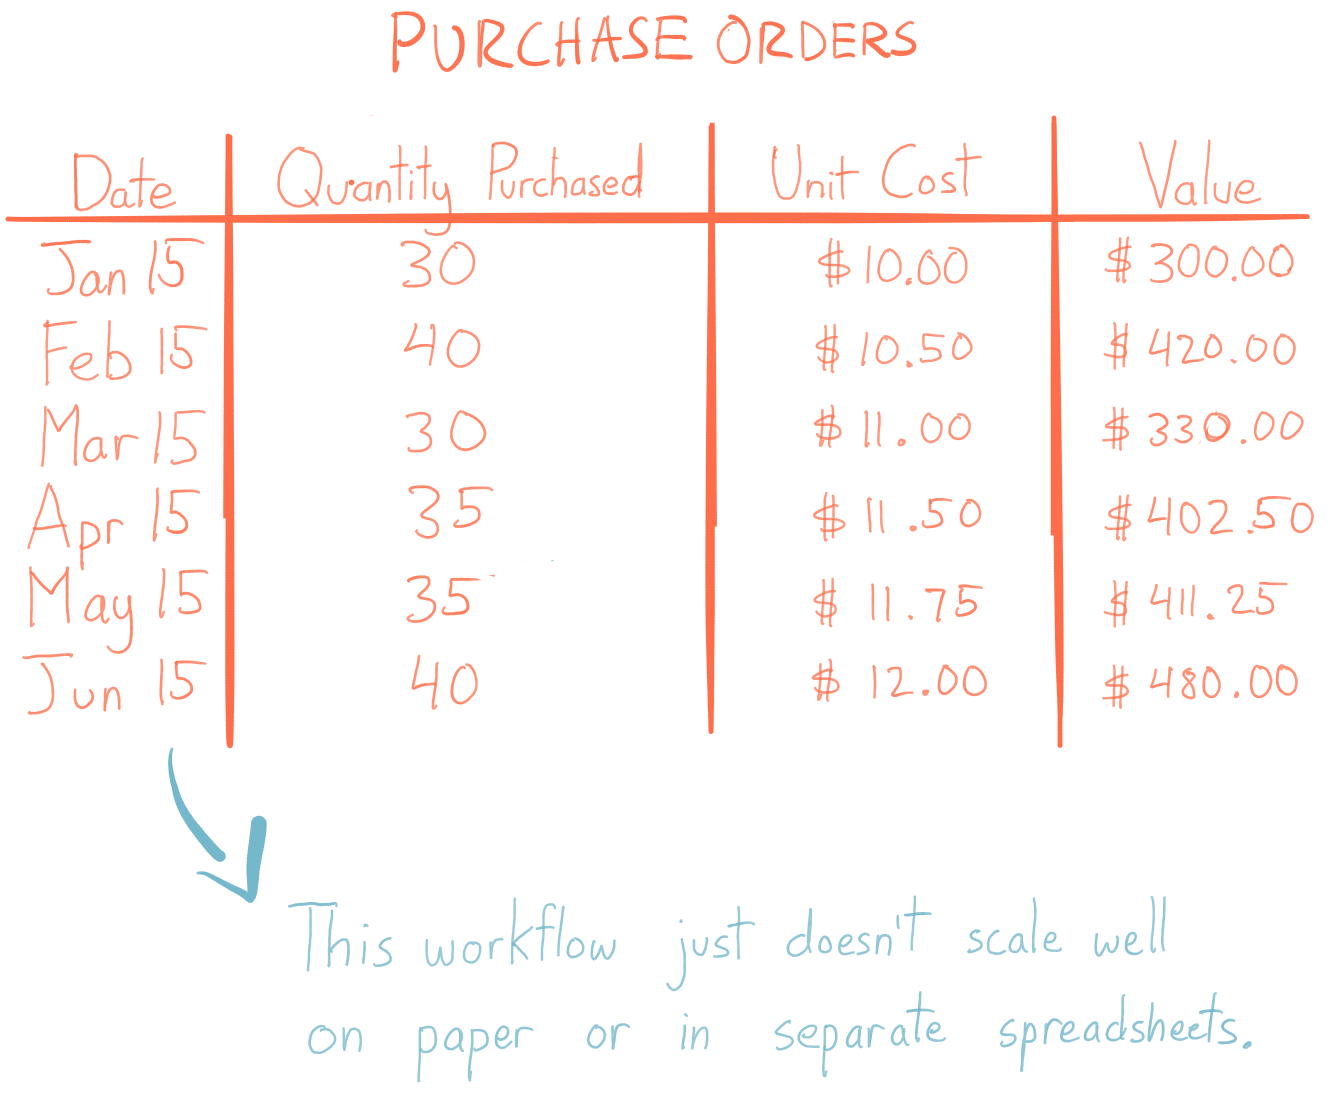 This table contains six purchase orders and demonstrates how tracking cost in separate tables does not scale well as a workflow, since the table could grow very large very quickly. 